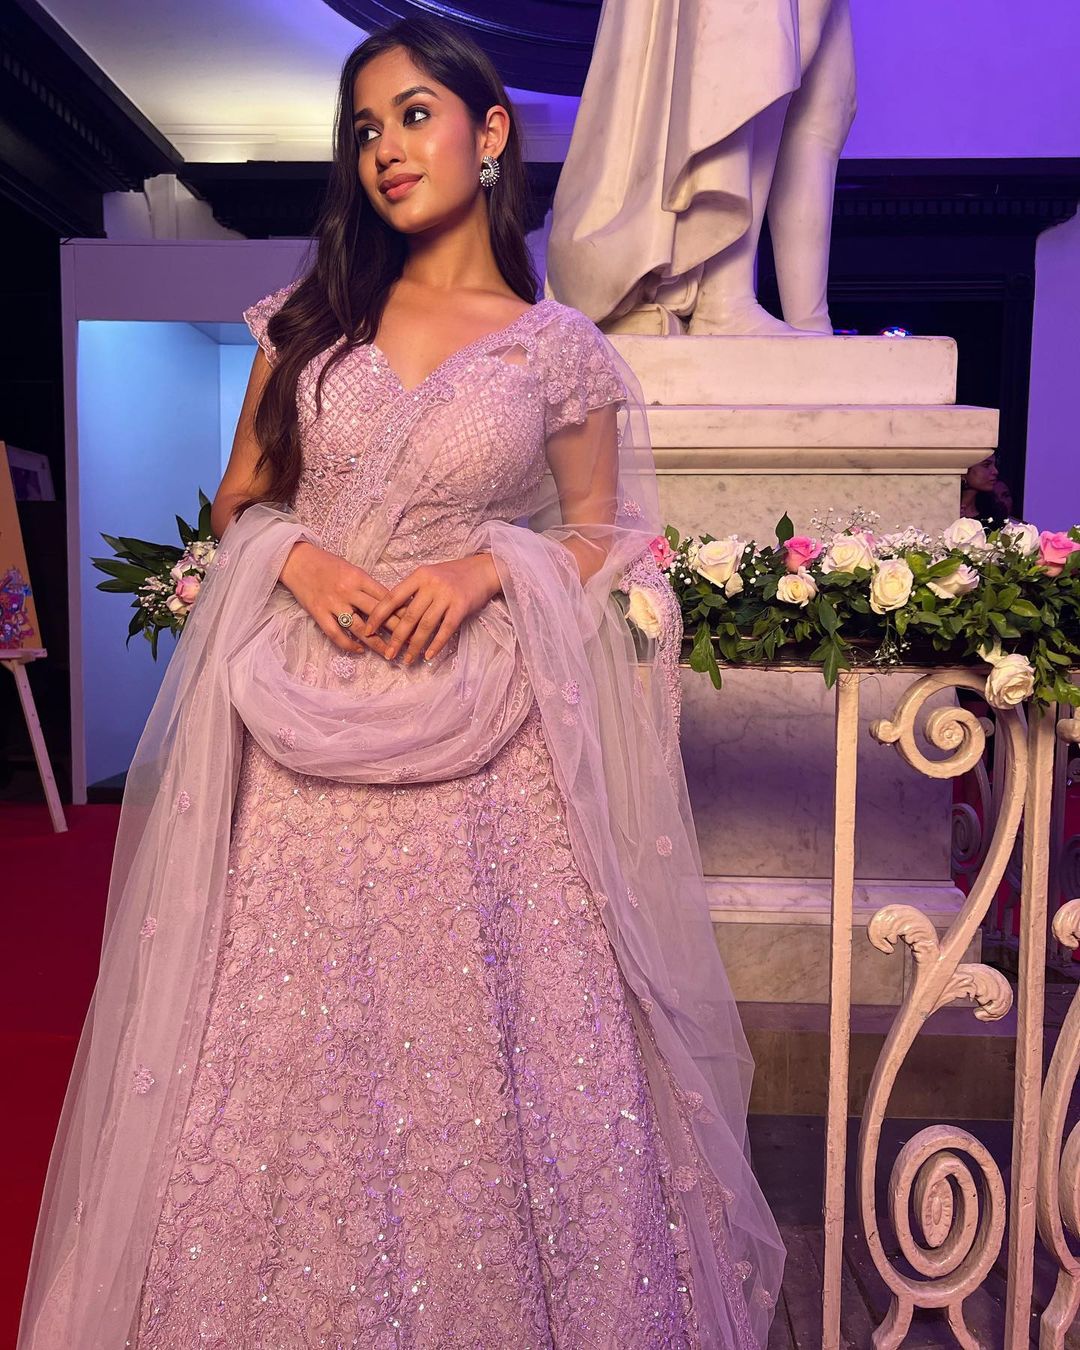 Jannat Zubair Flaunts Her Glamorous Looks In These Pretty Gowns